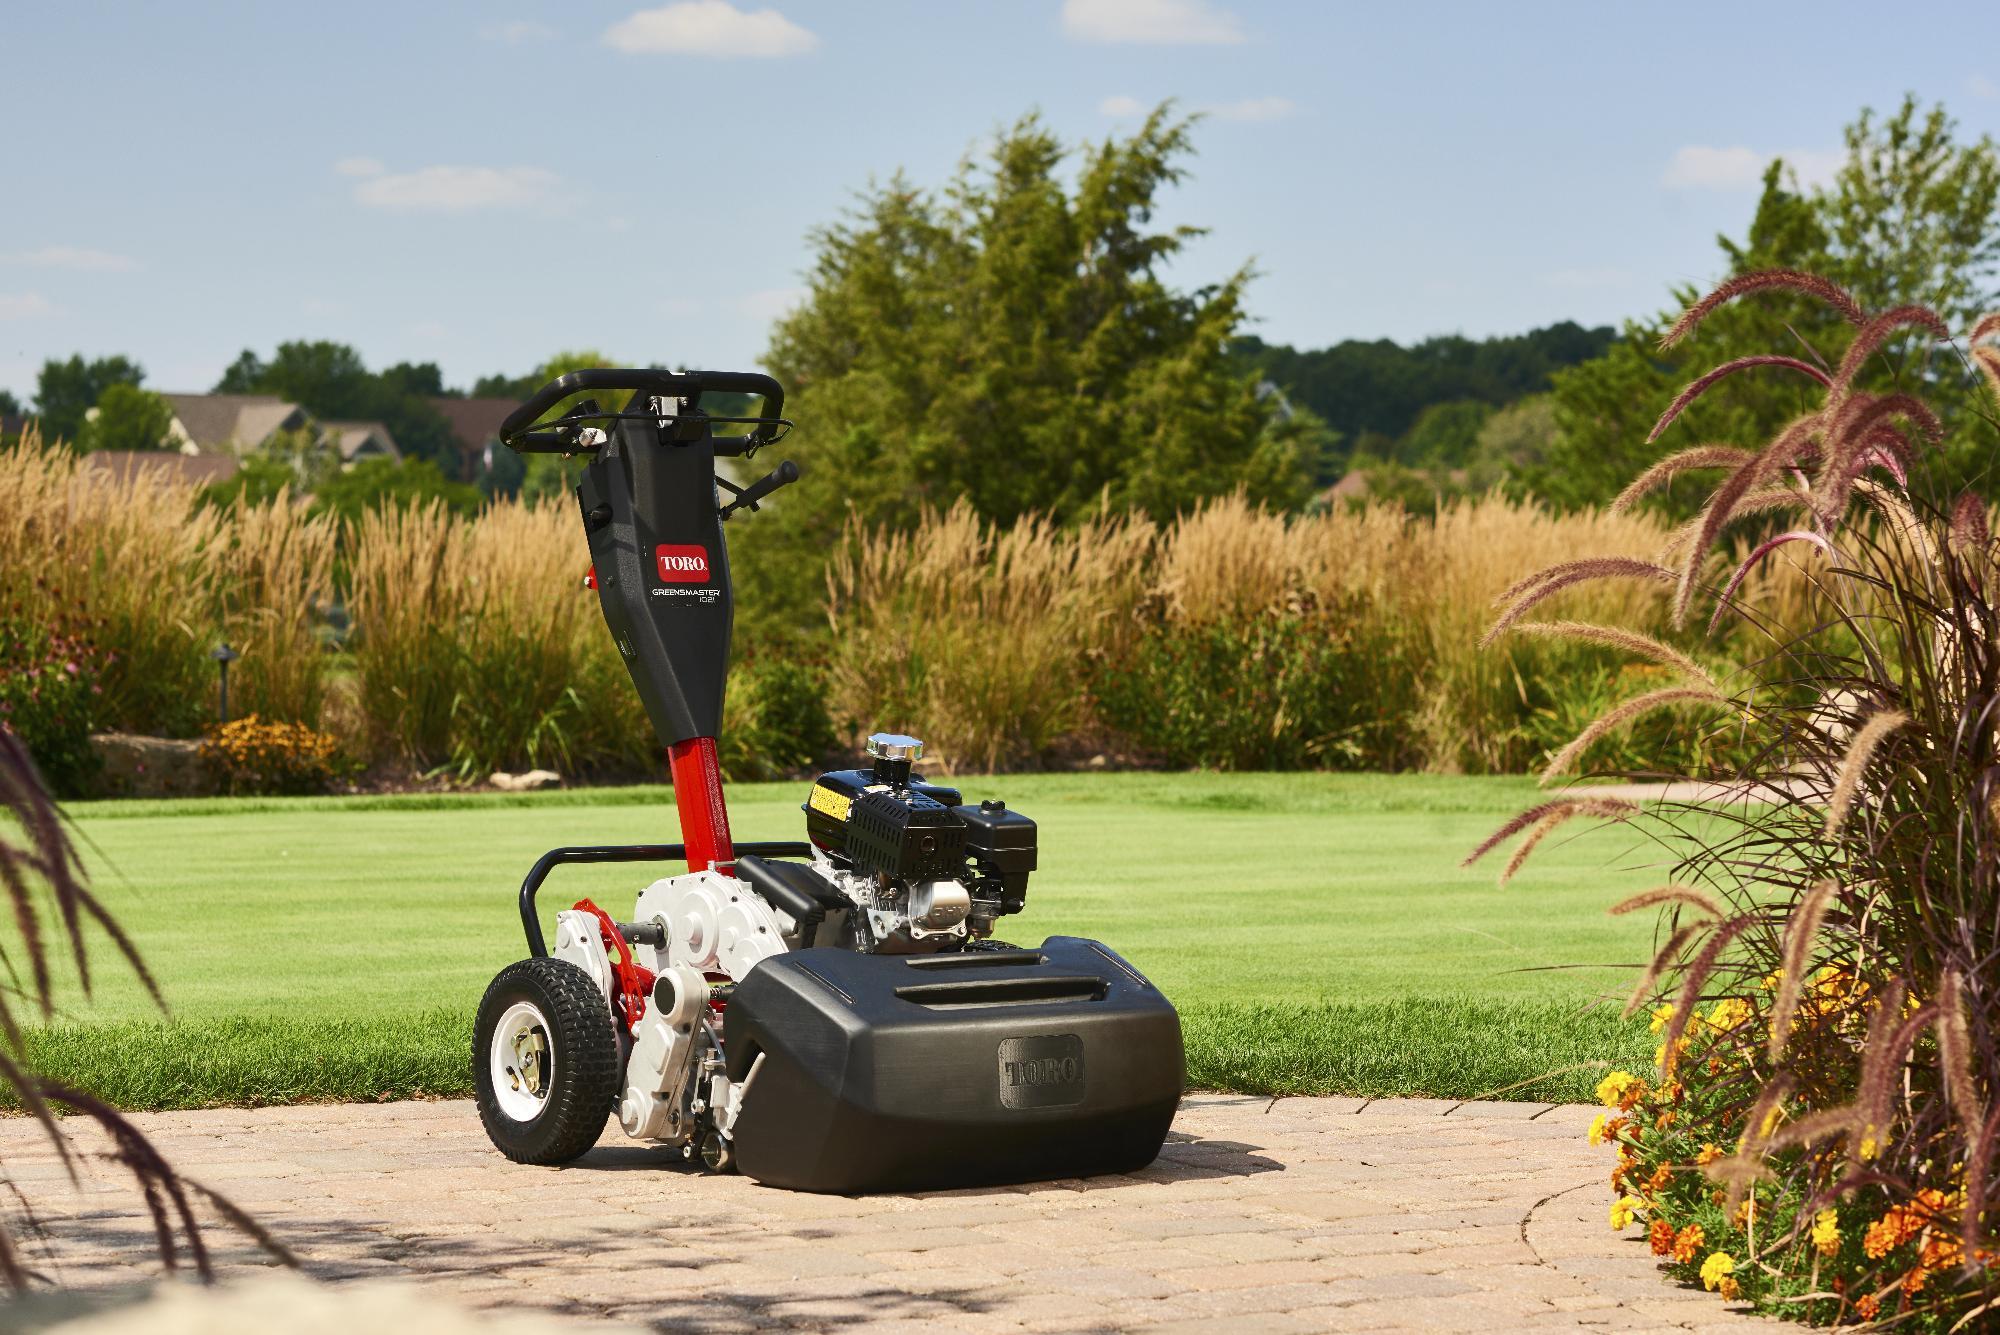 Toro Greensmaster 1021 stationary in front of a freshly cut golf course.